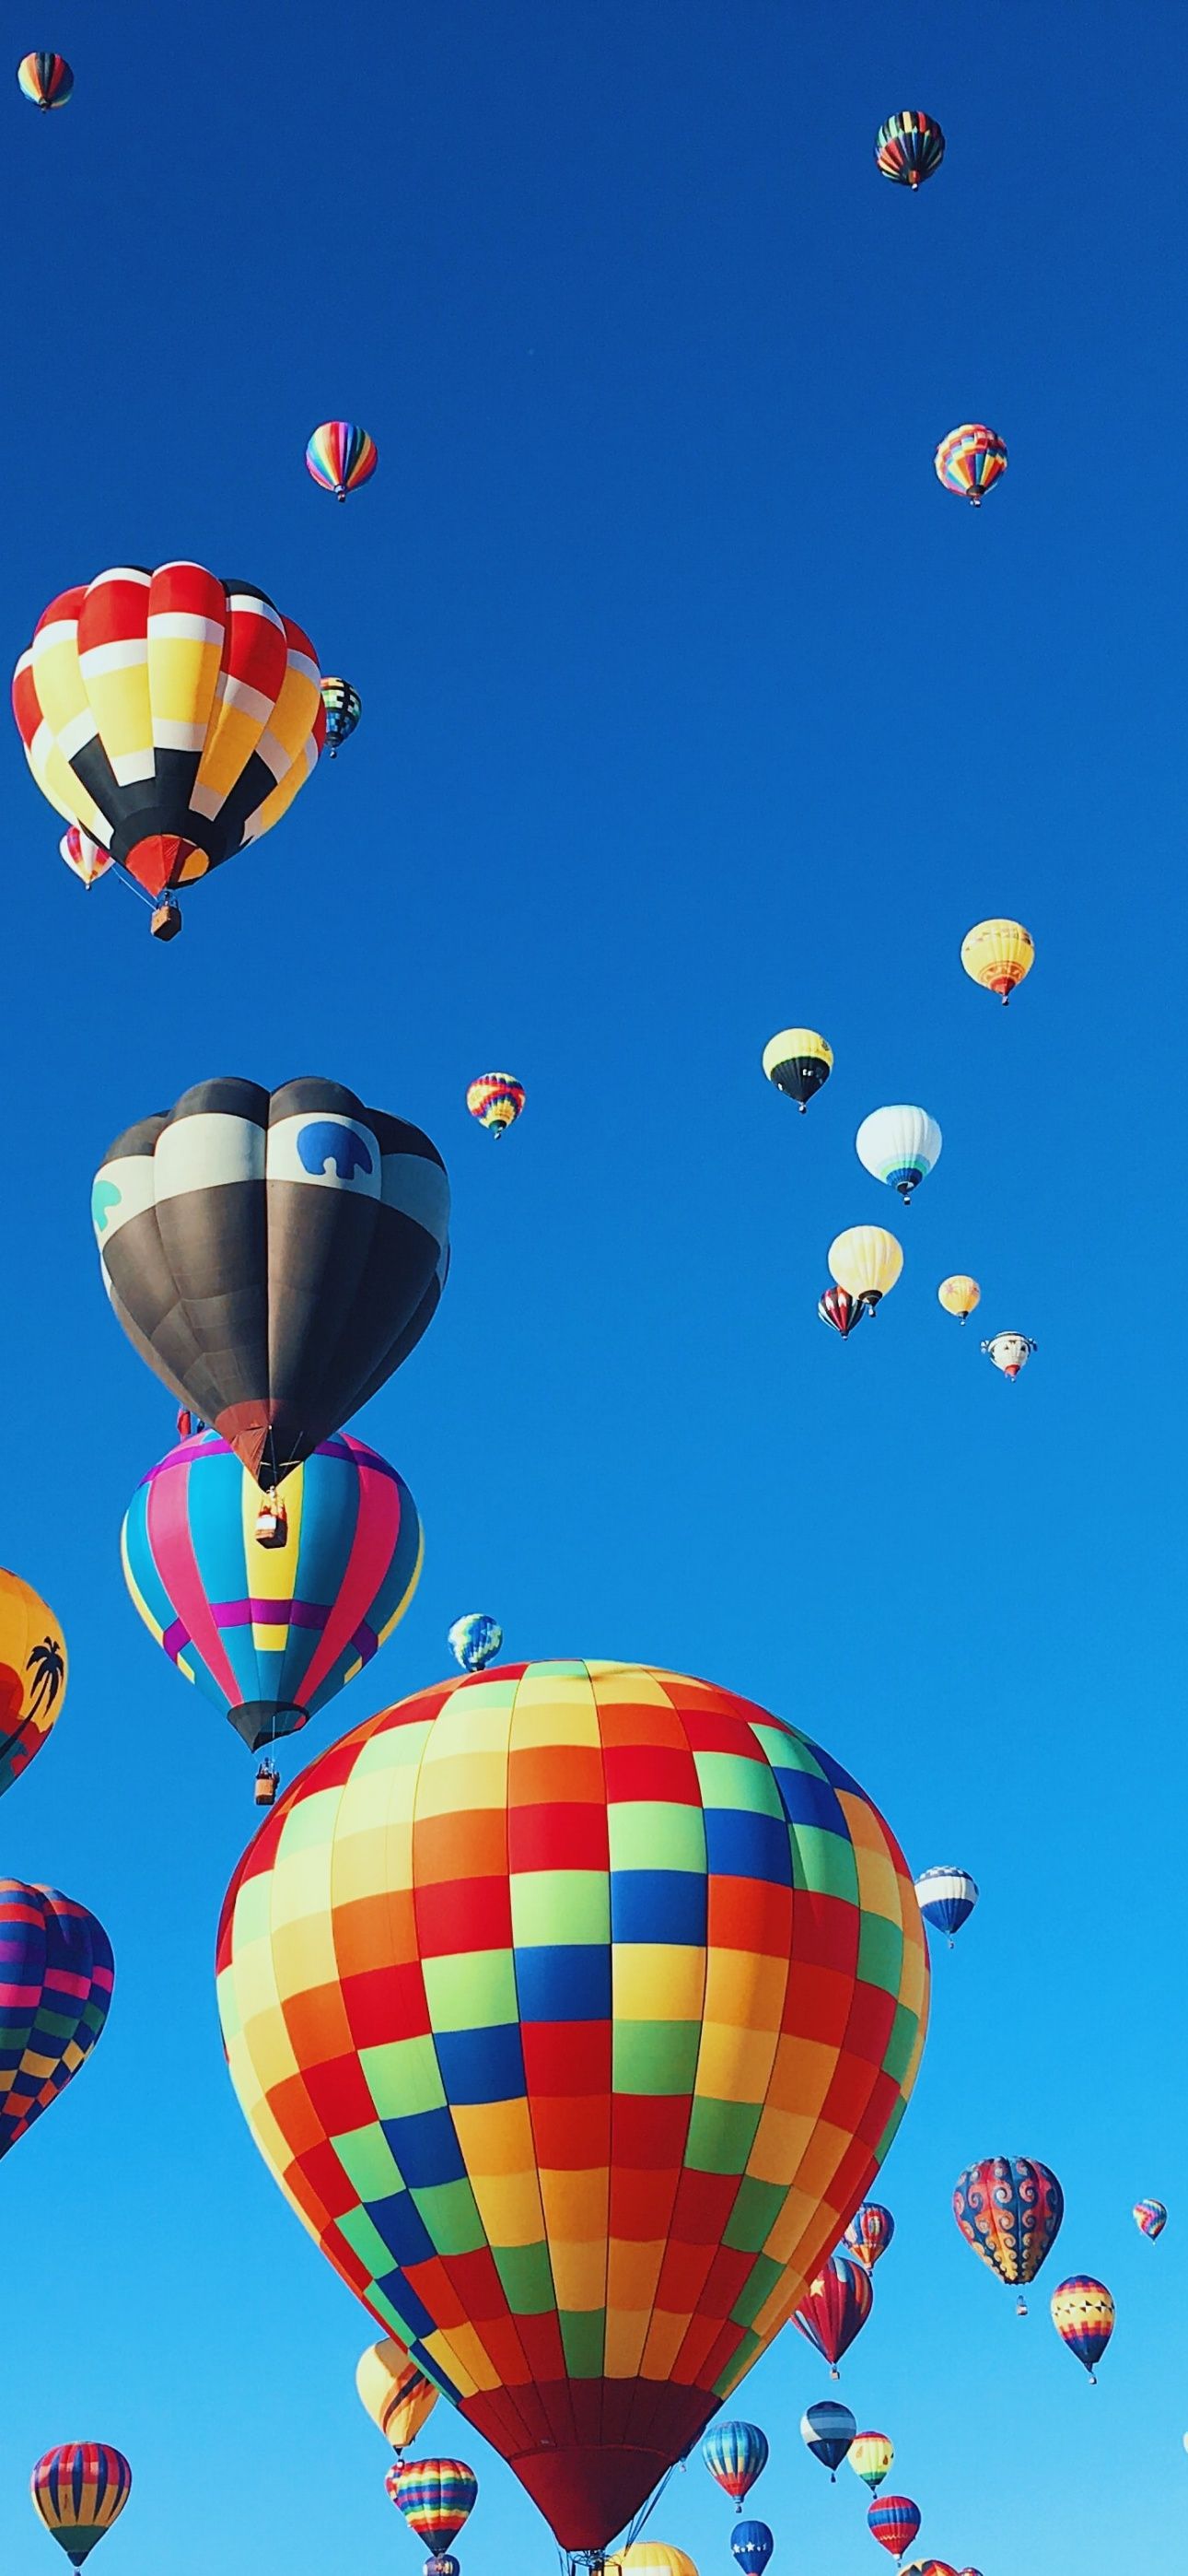 Hot air balloons Wallpaper 4K, Festival, Colorful, Photography